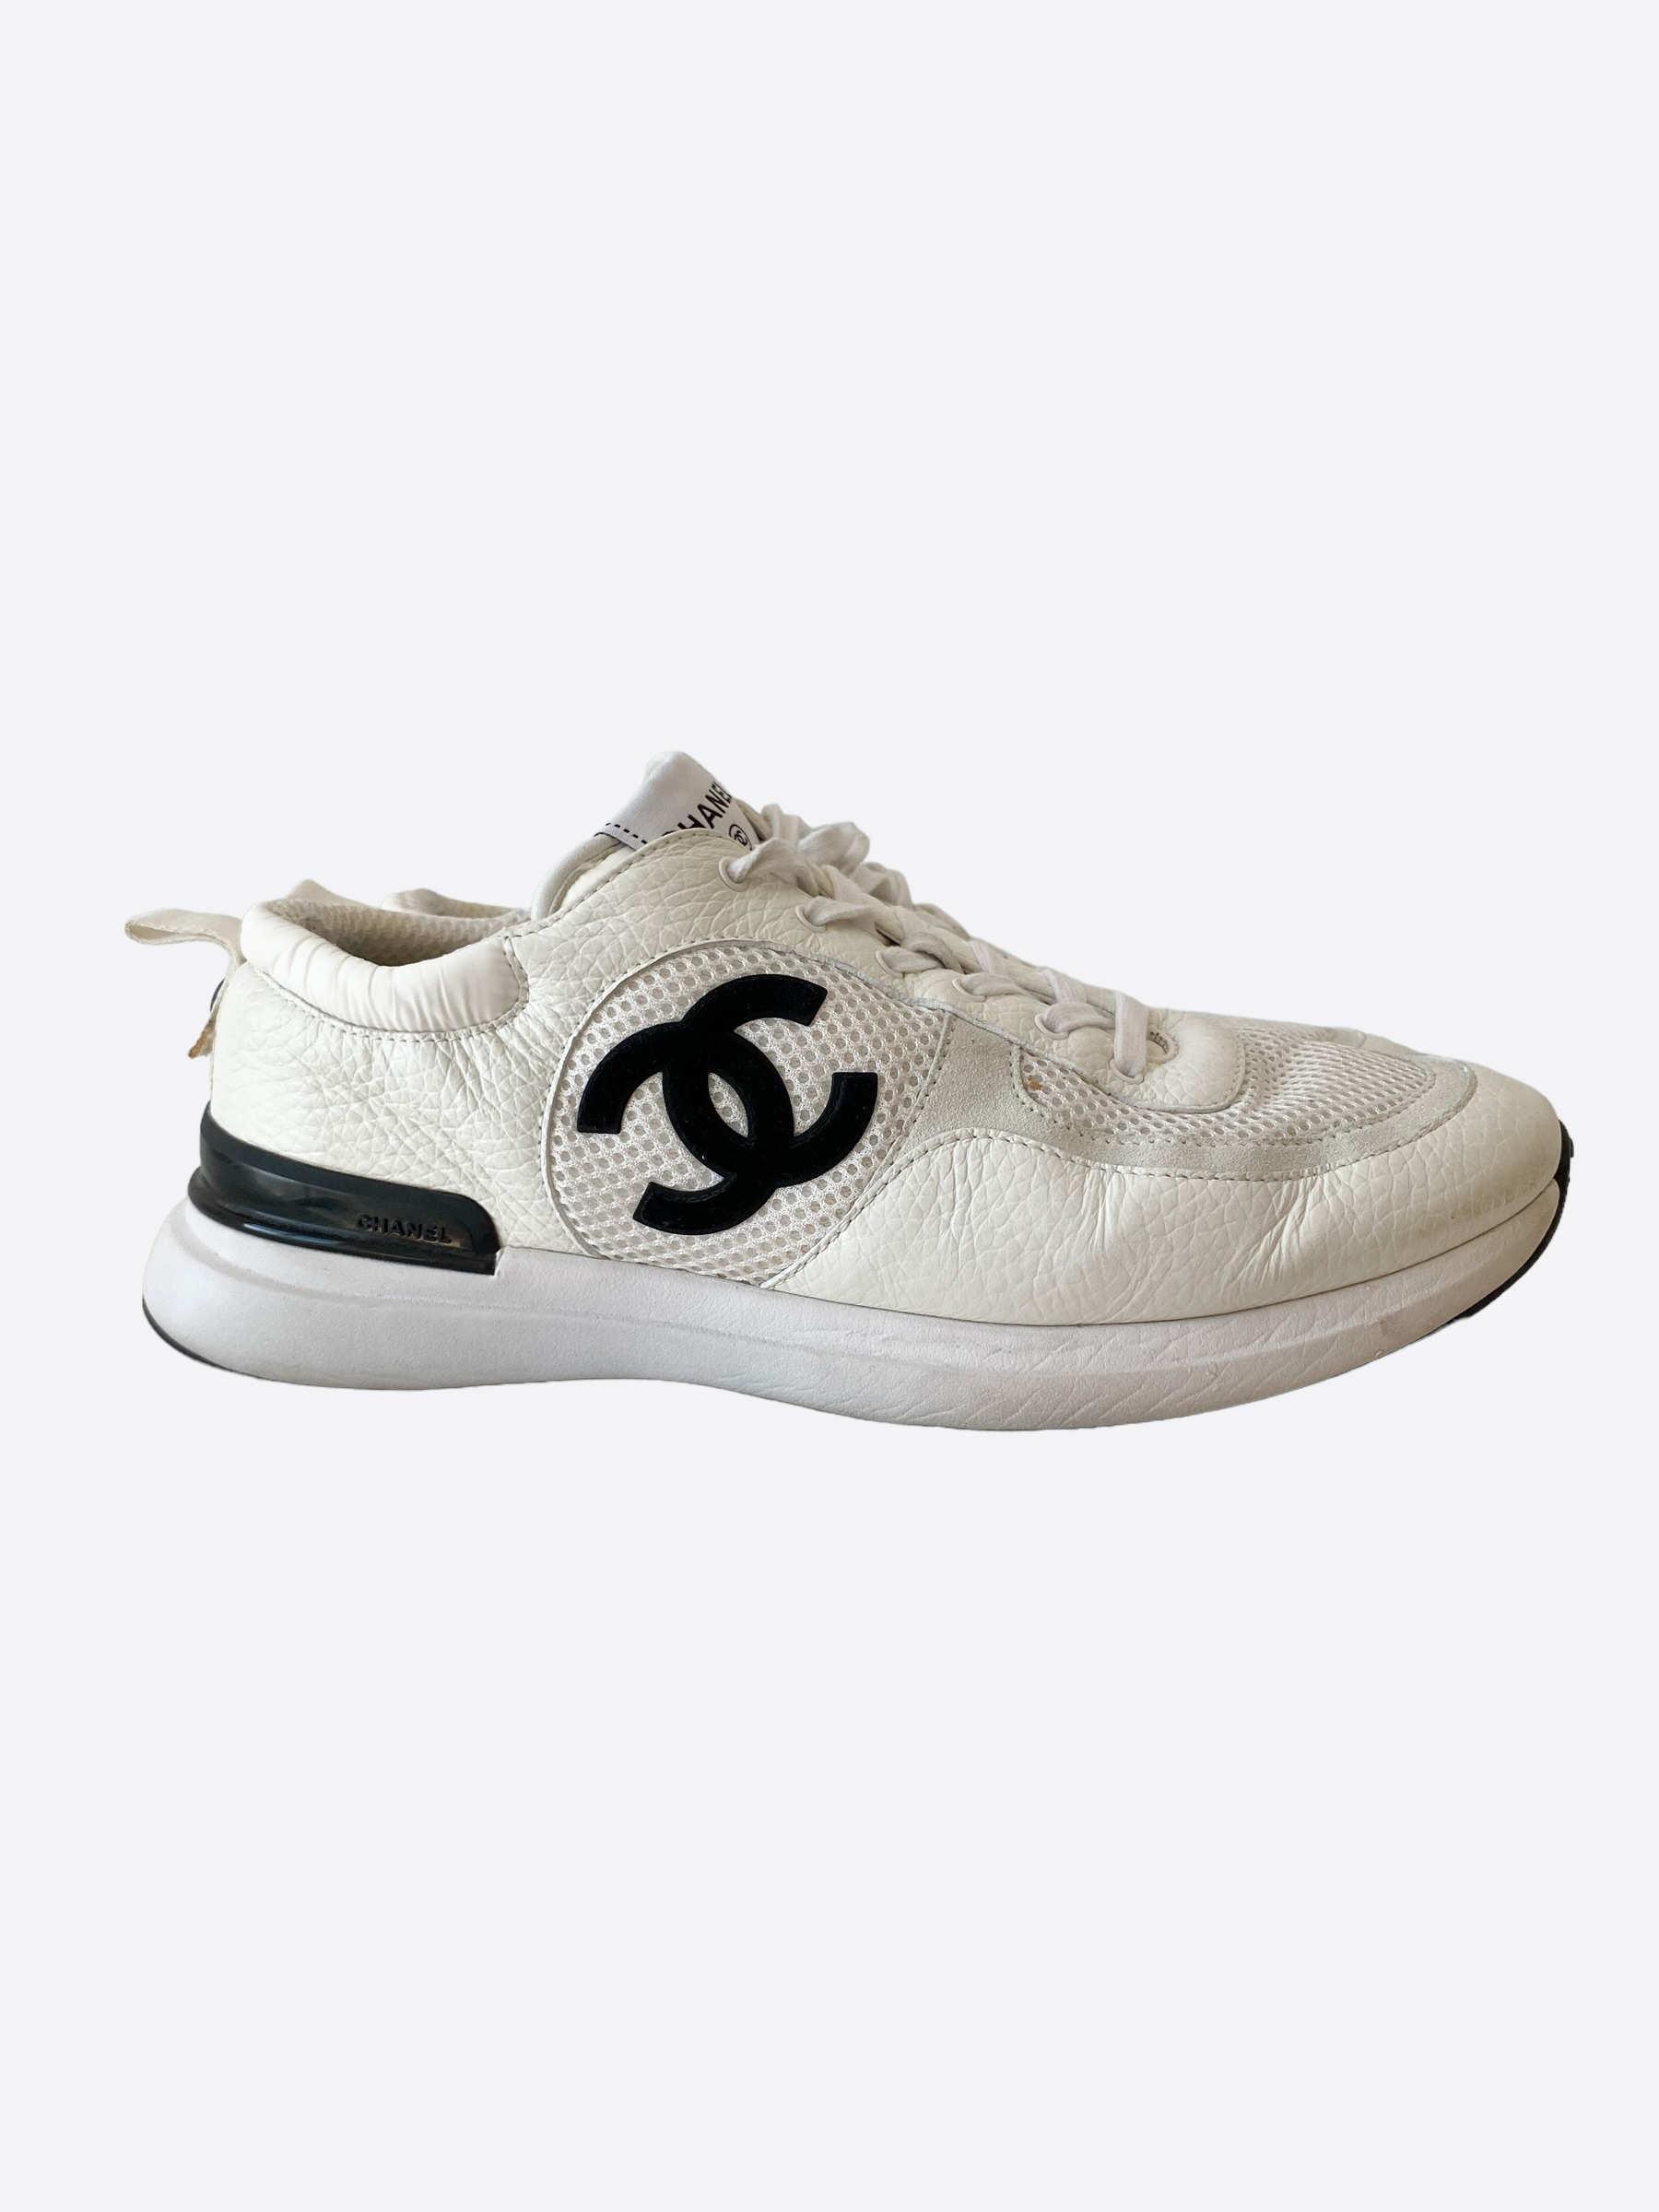 Chanel Black Leather Mesh Sneakers Tennis Trainers 35 White